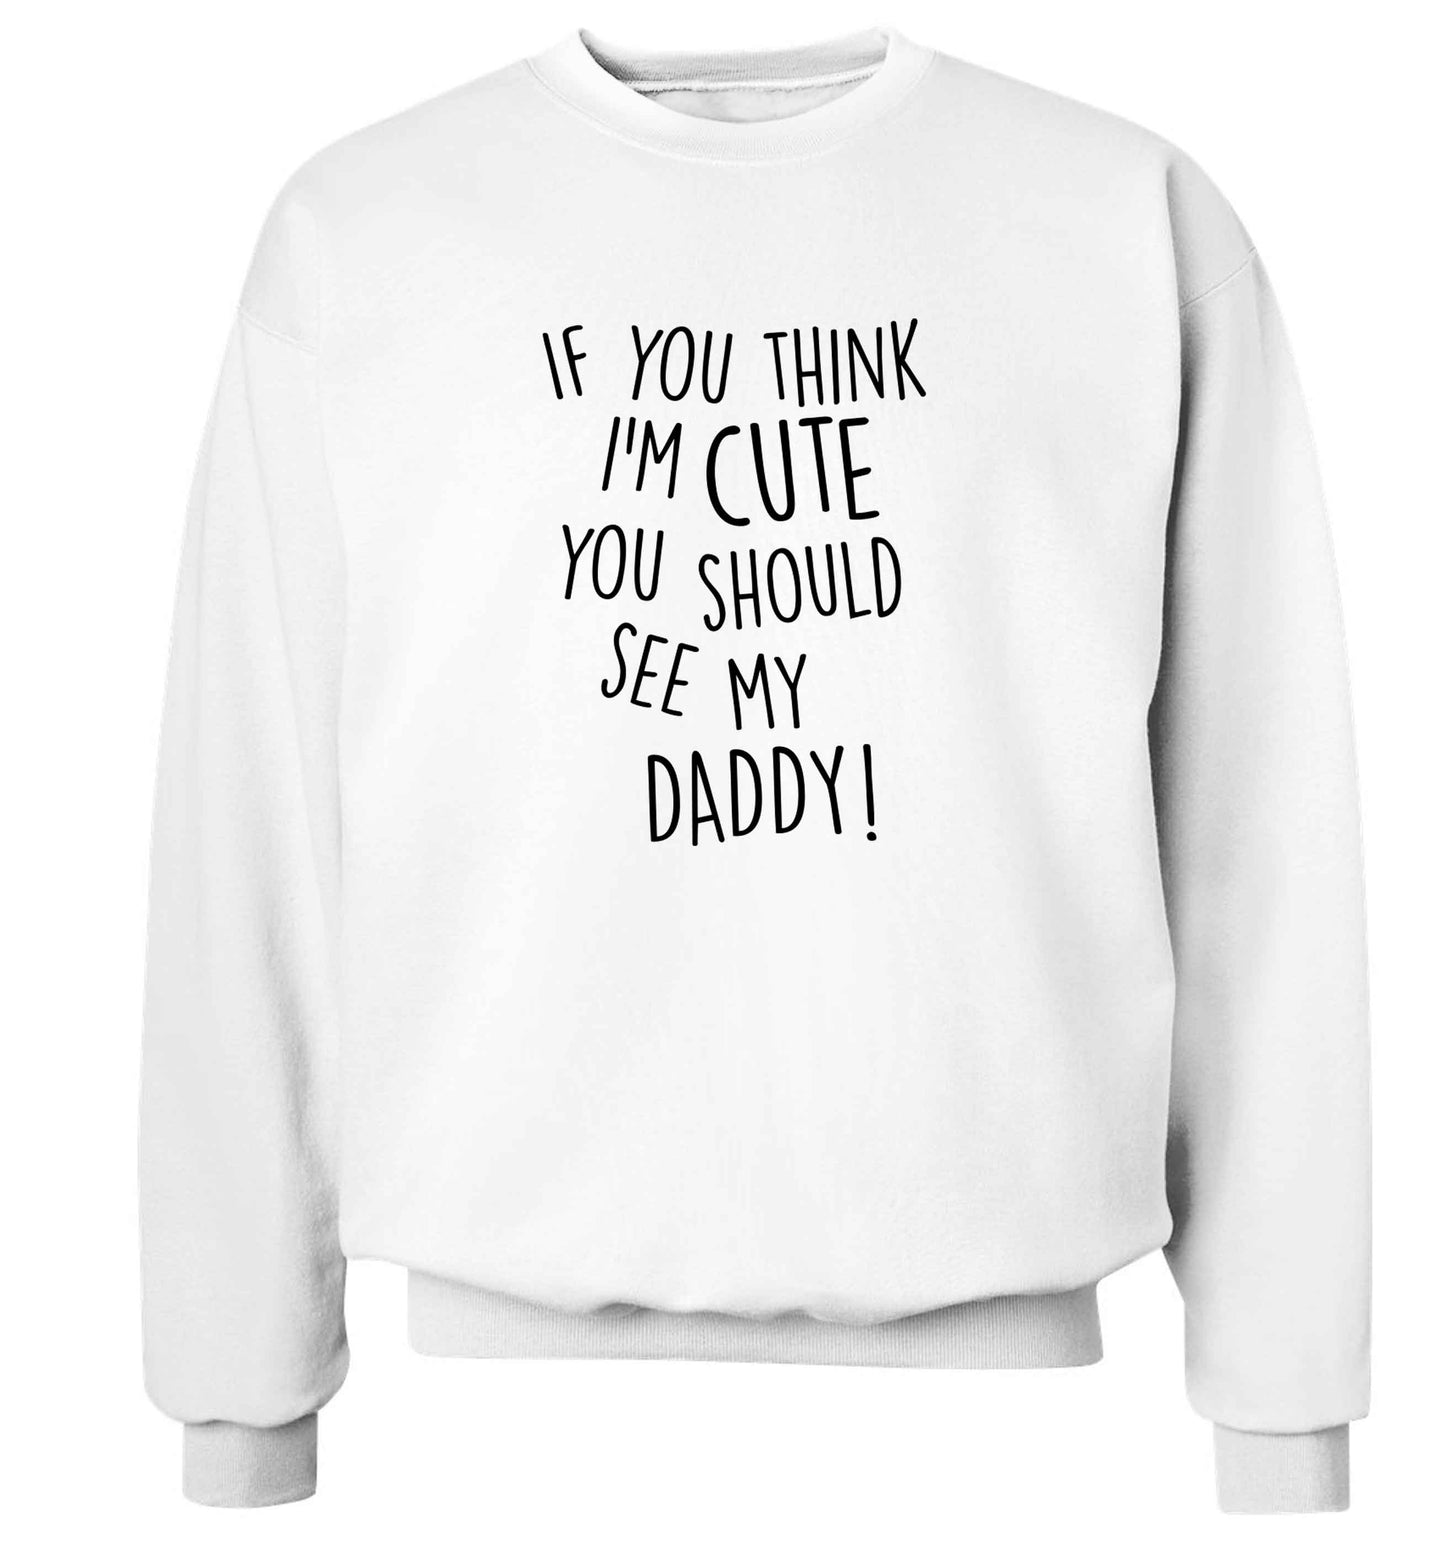 If you think I'm cute you should see my daddy adult's unisex white sweater 2XL